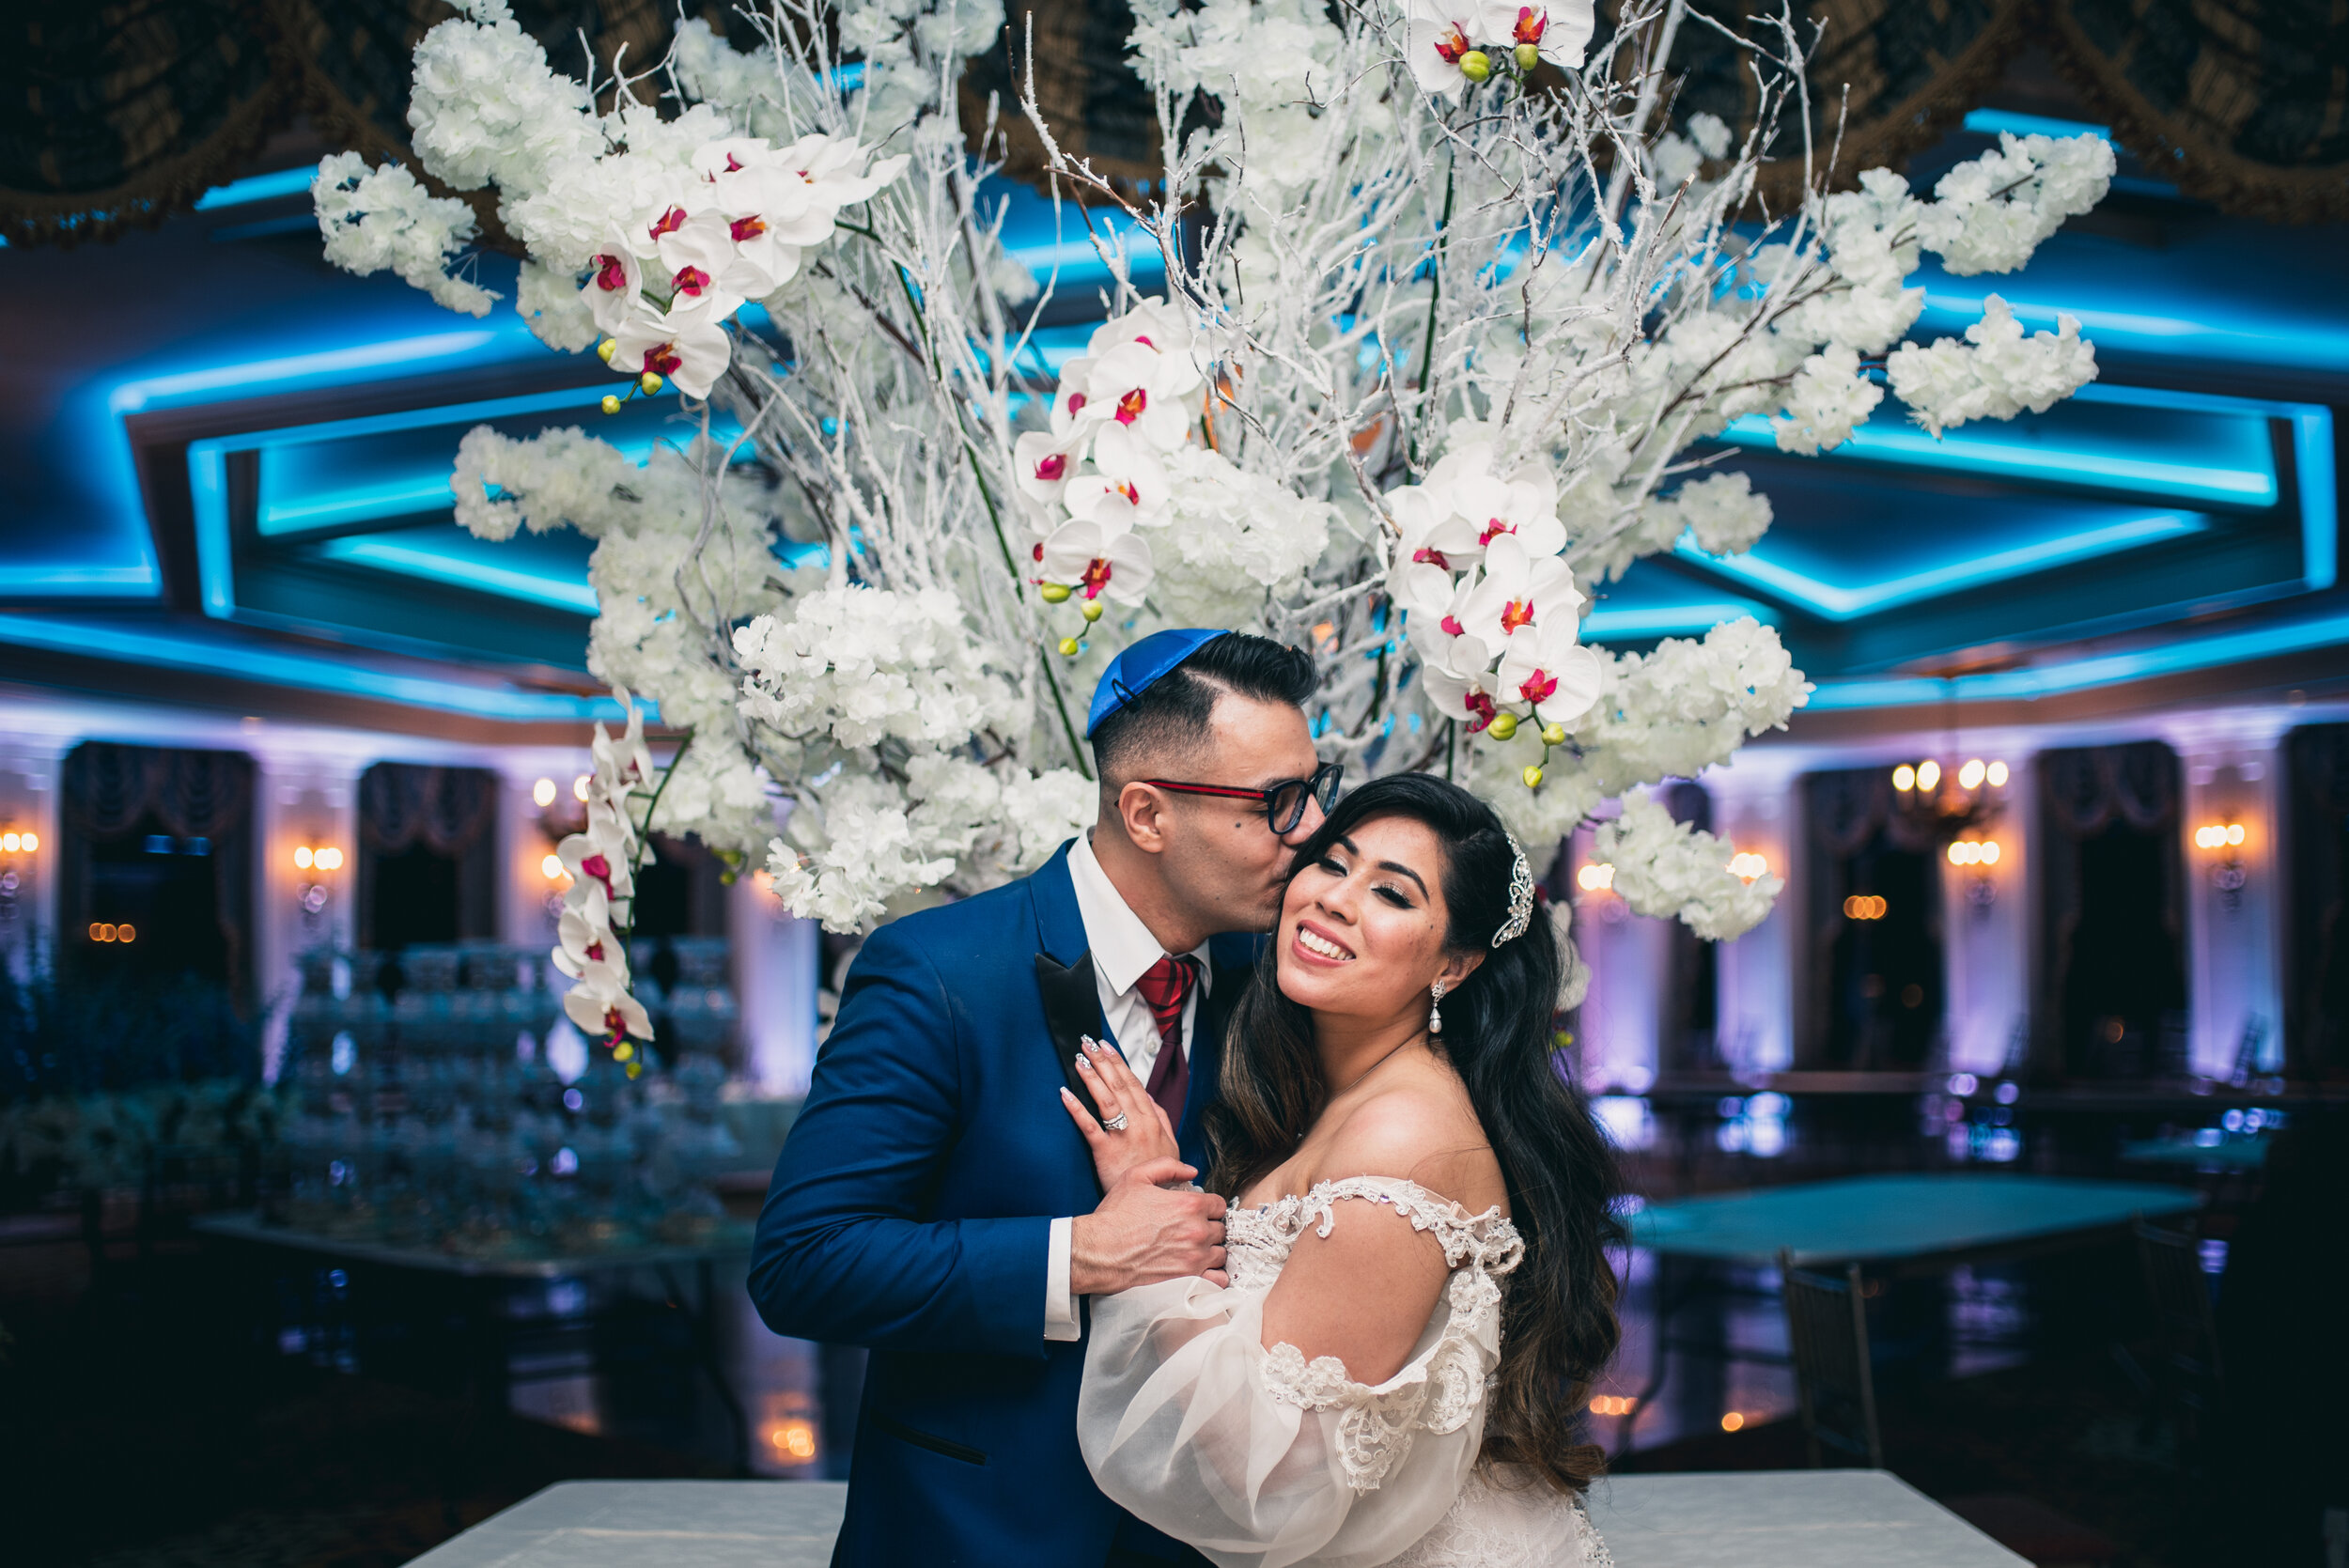 Tiffany + Yuriy — Portrait of a Young Couple picture